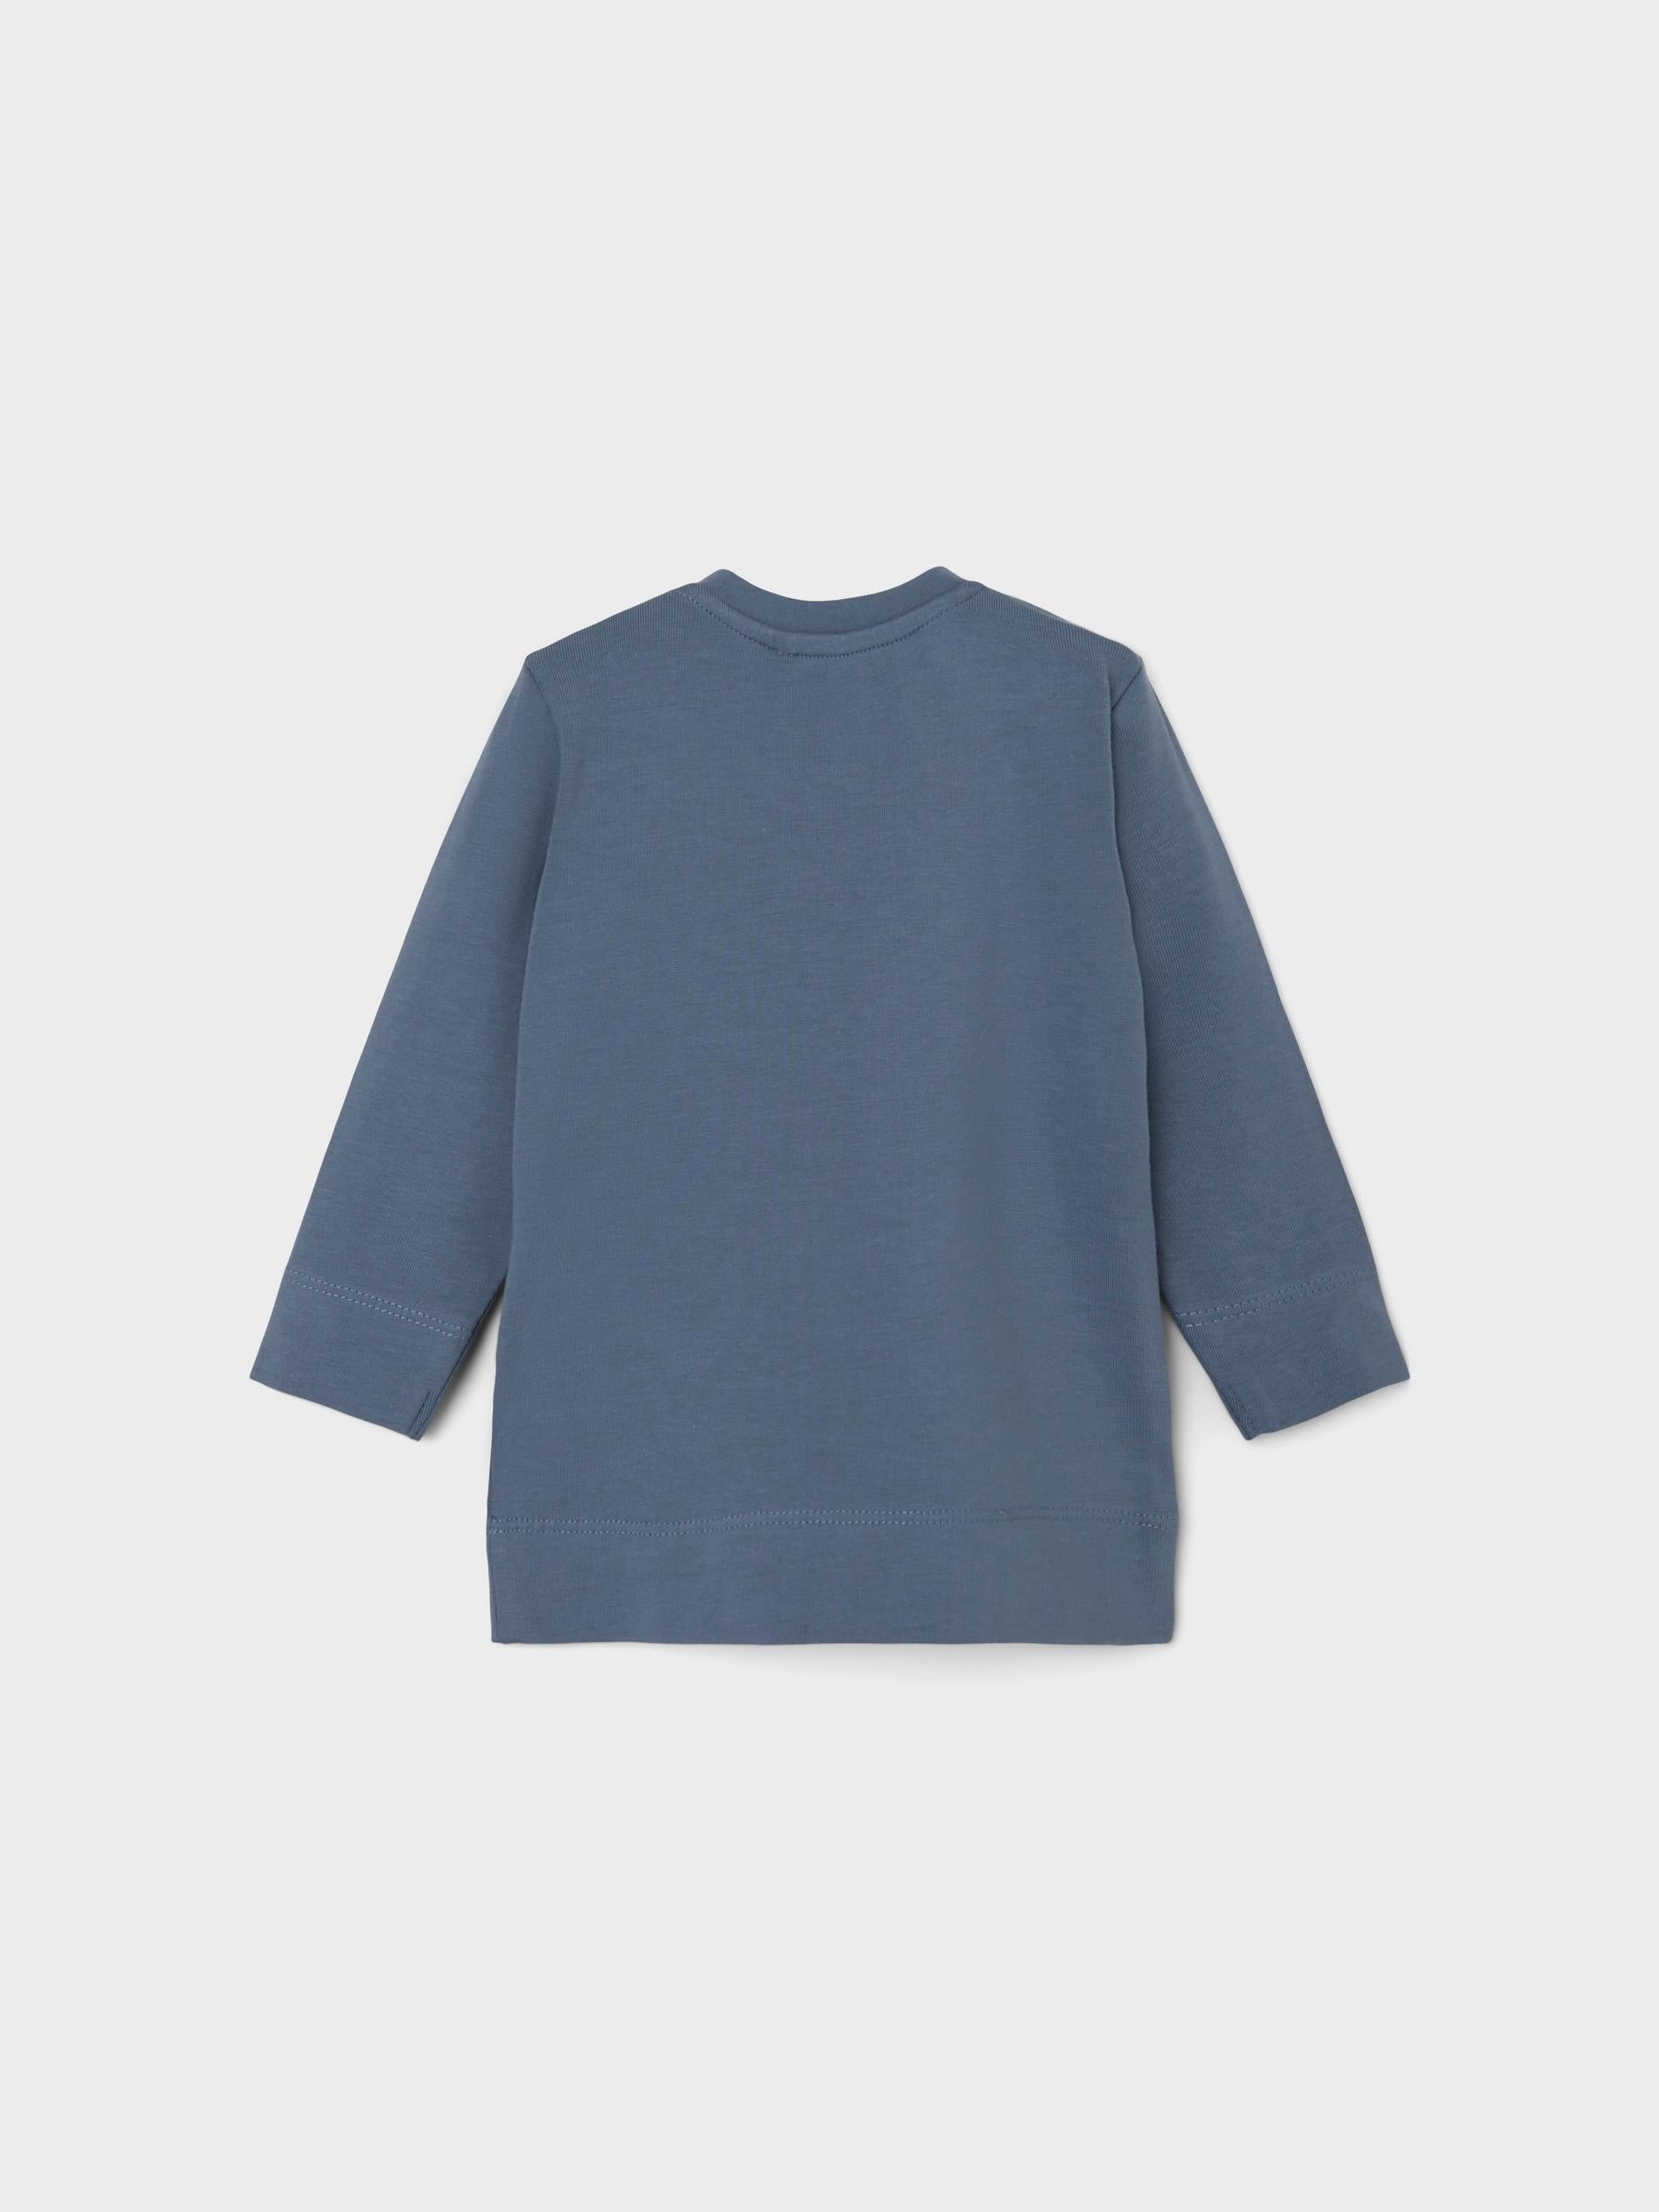 Boy's China Blue Oles Long Sleeve Top-Back View